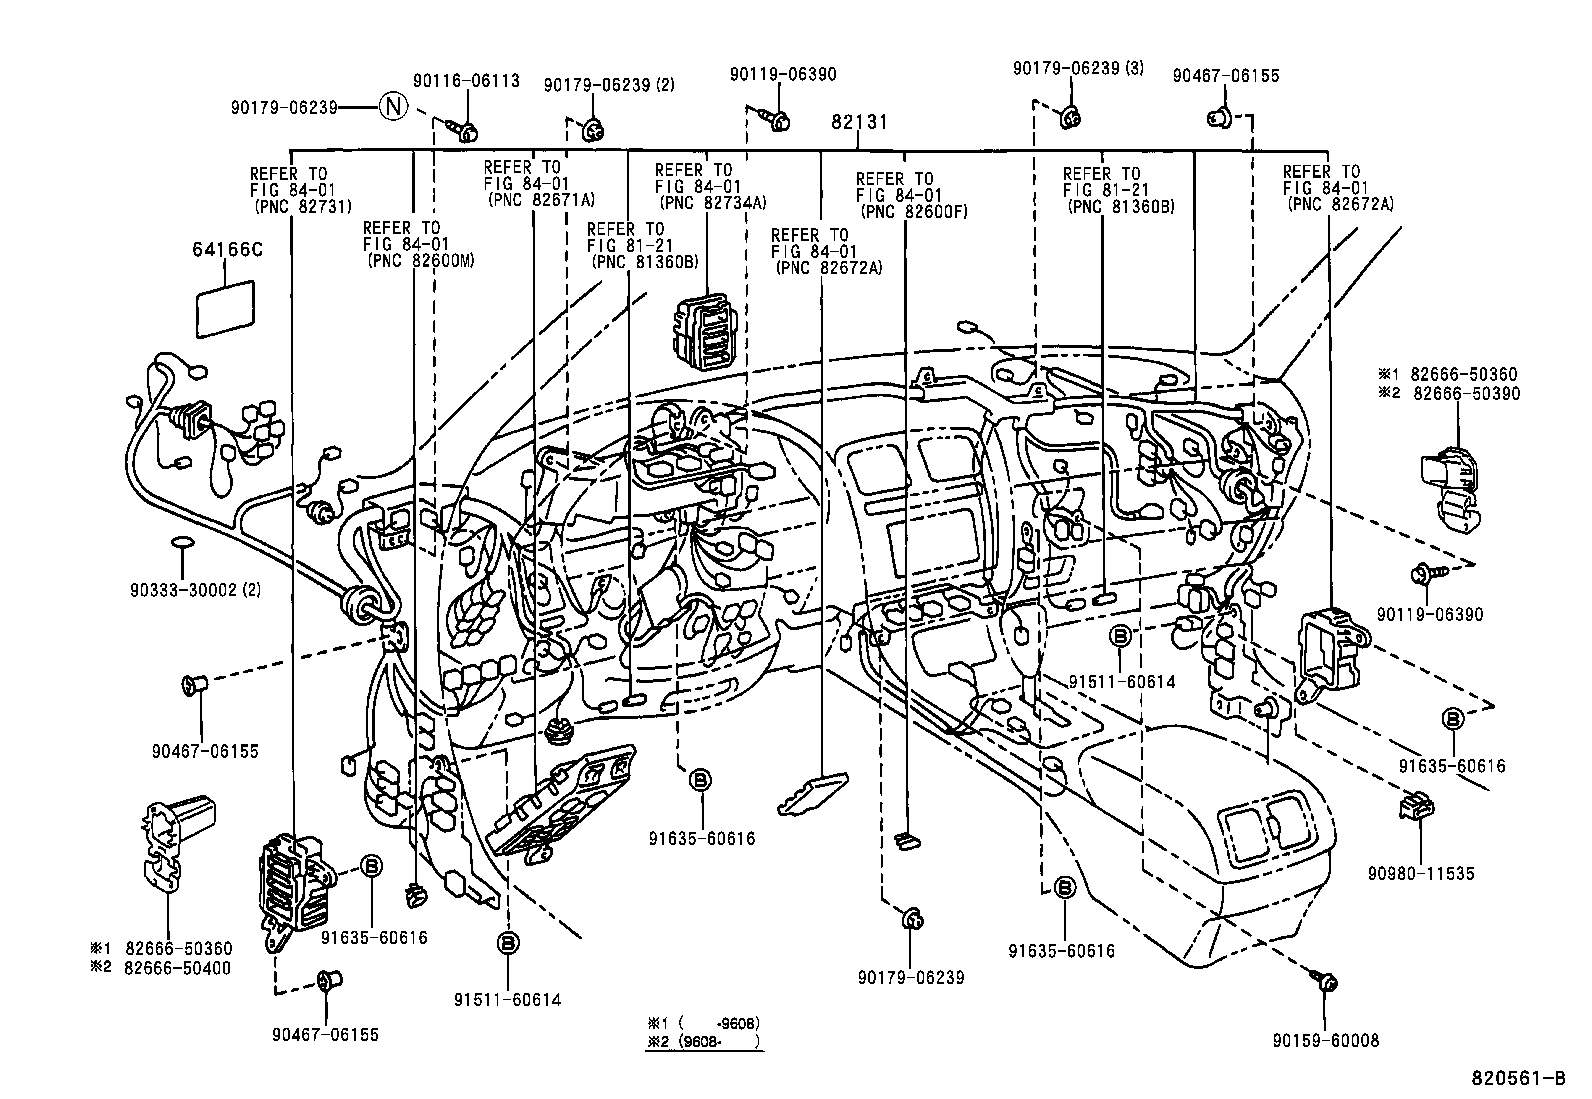  LS400 |  WIRING CLAMP